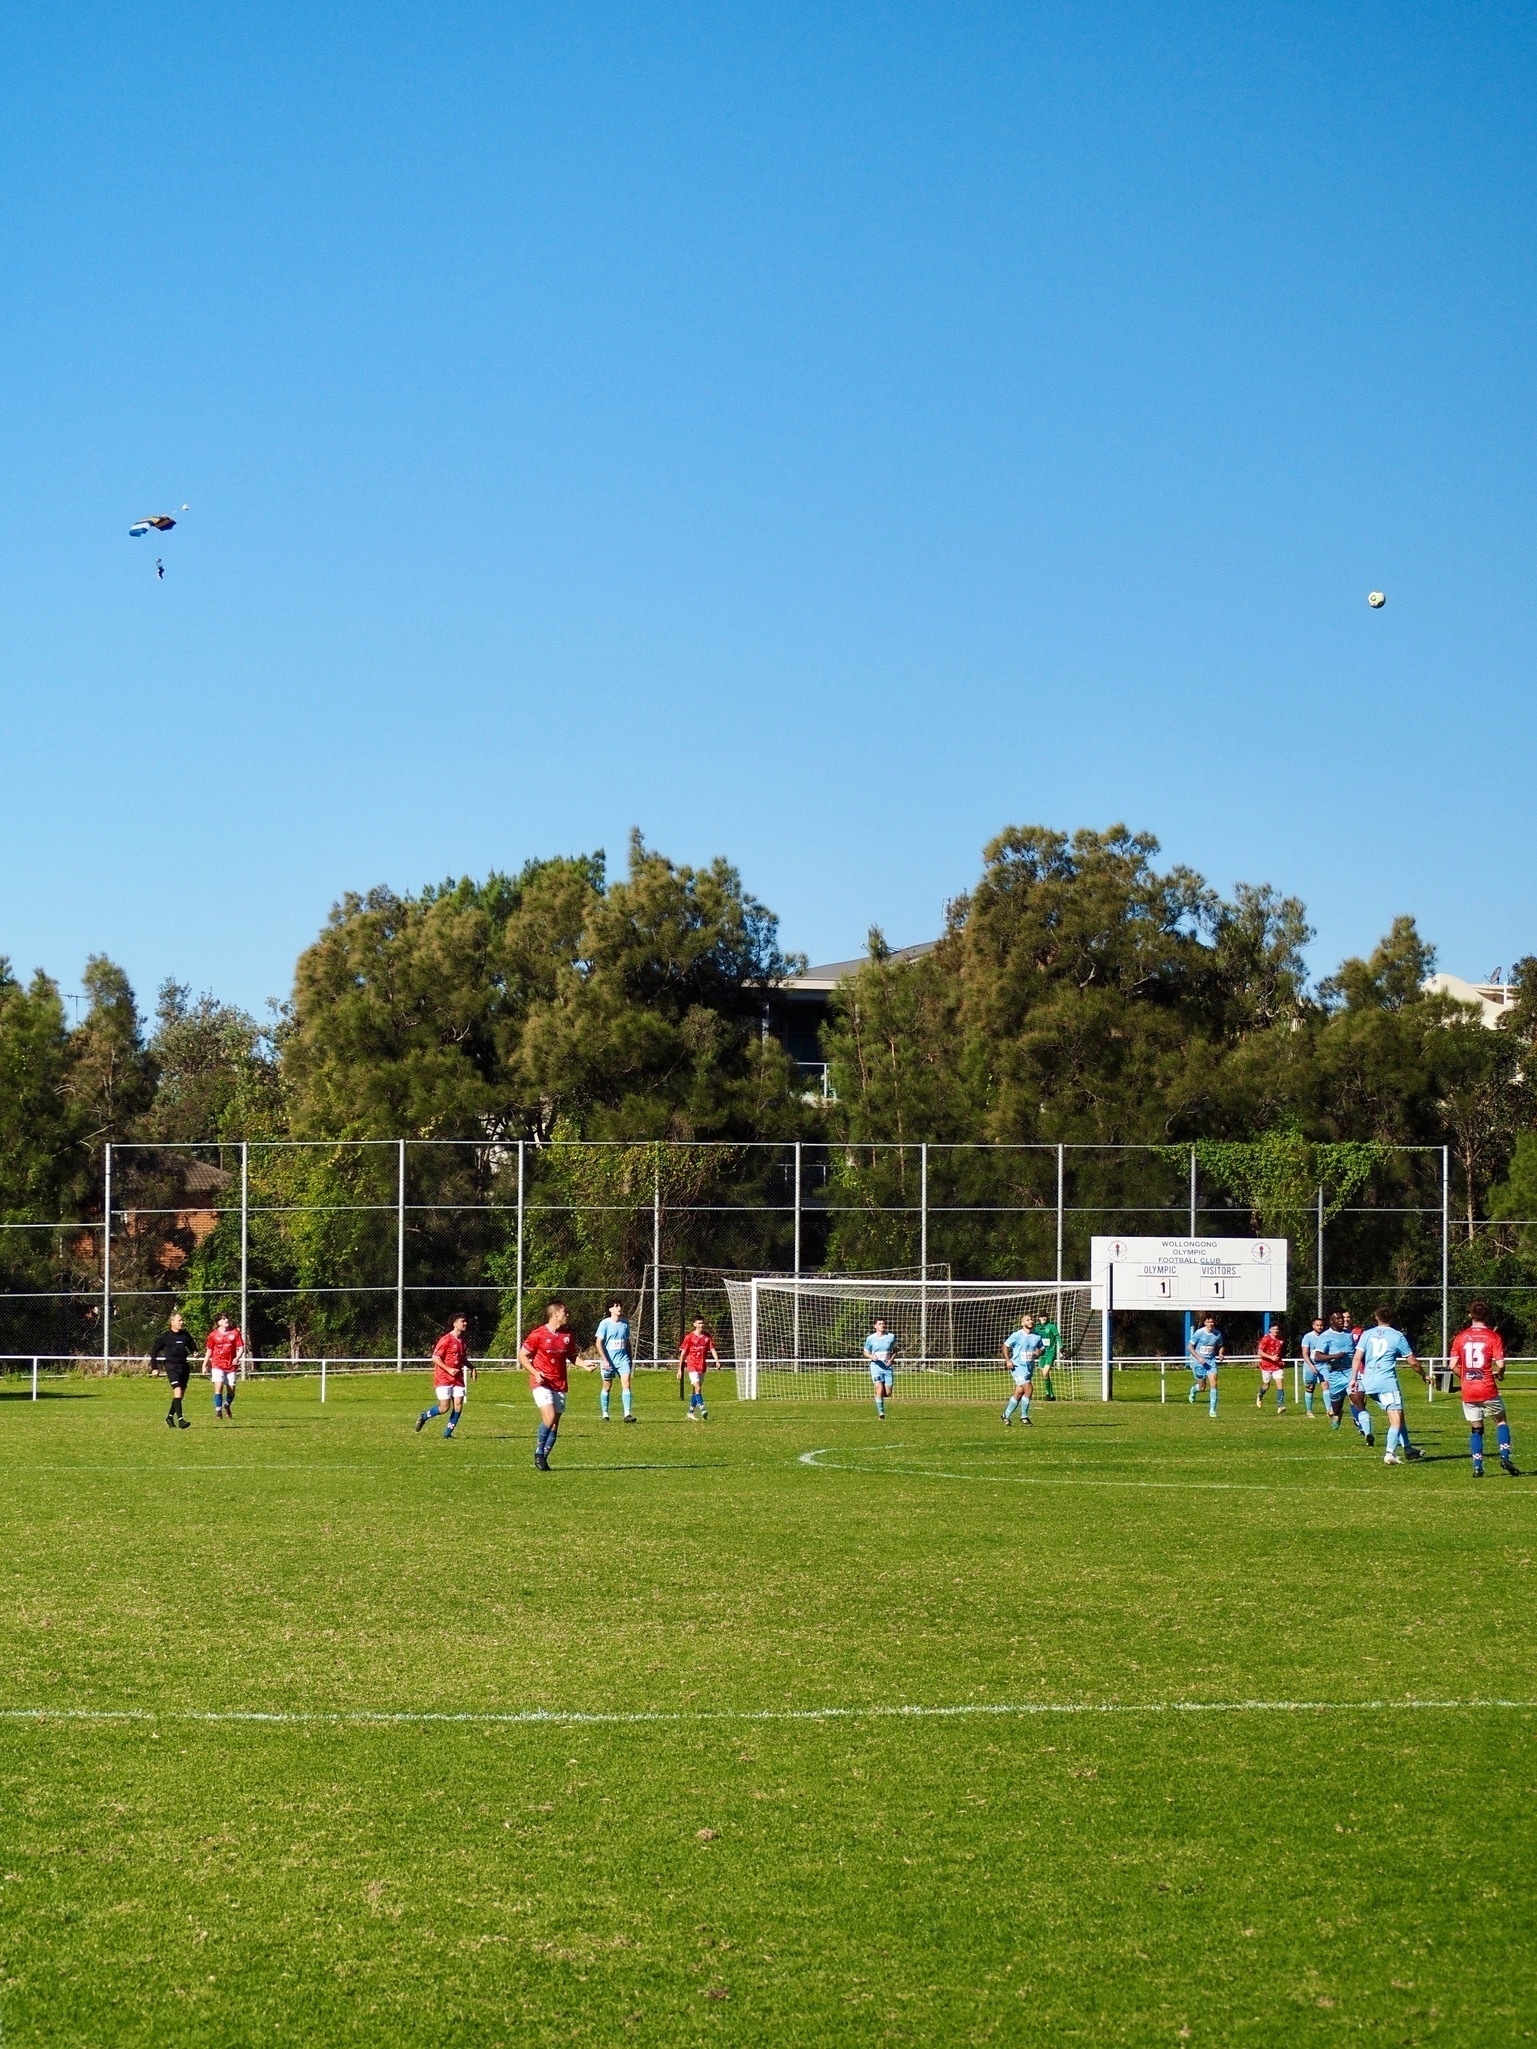 A football match with the ball in the air and a parachute in the sky